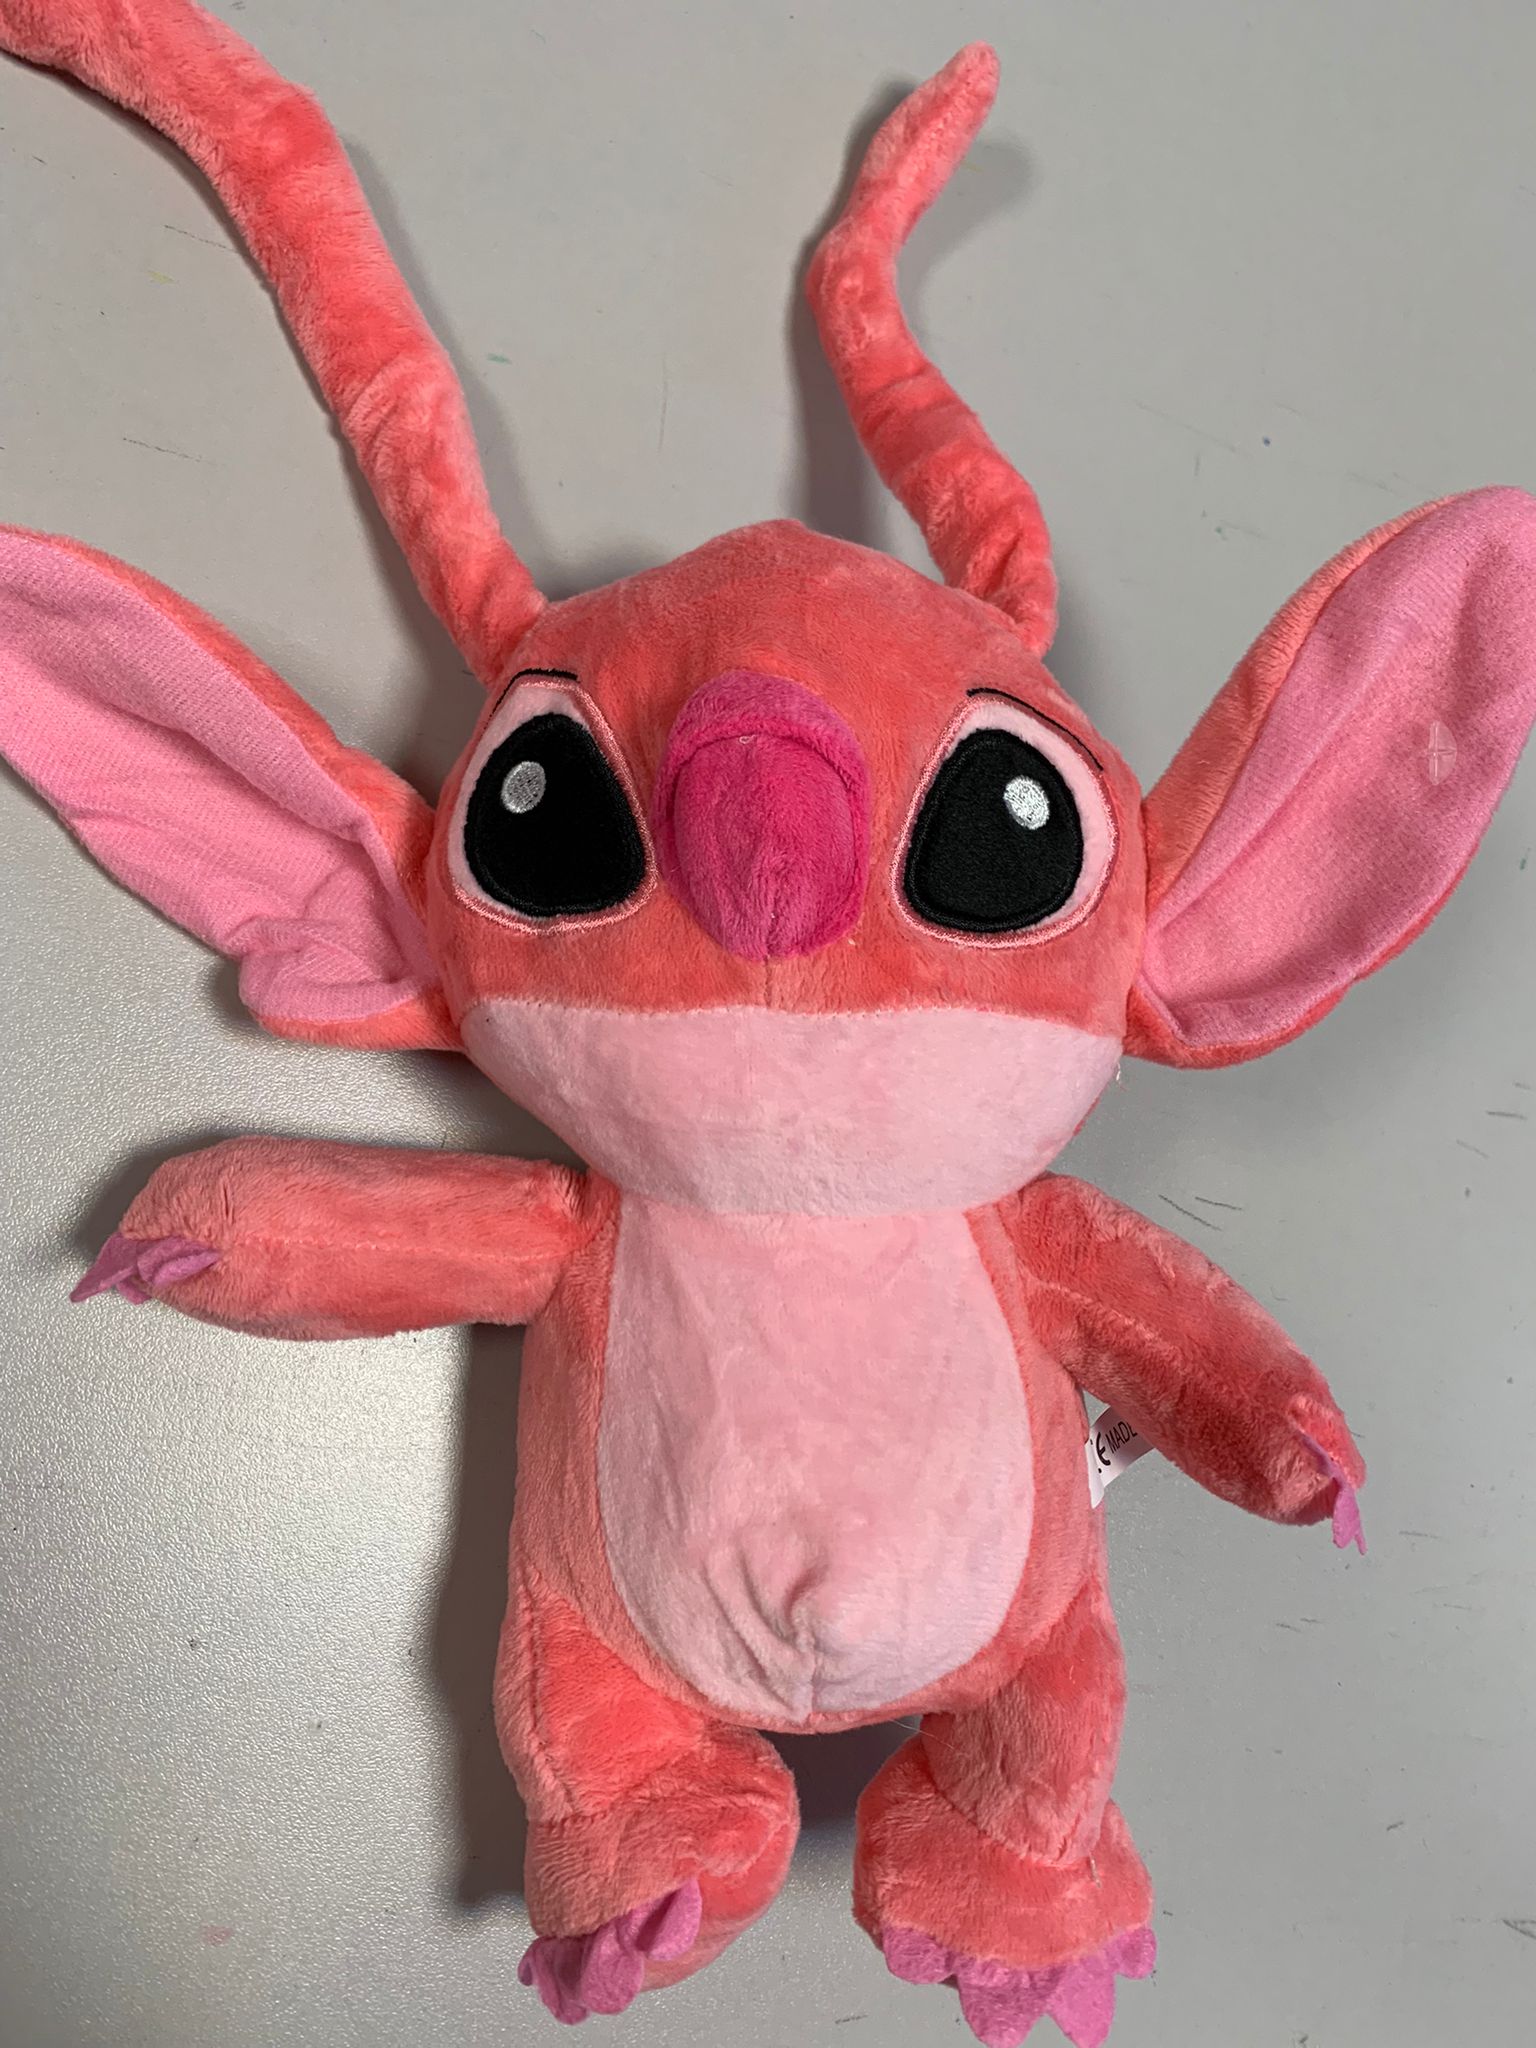 Plush character Angel from the fairy tale Lilo & Stitch